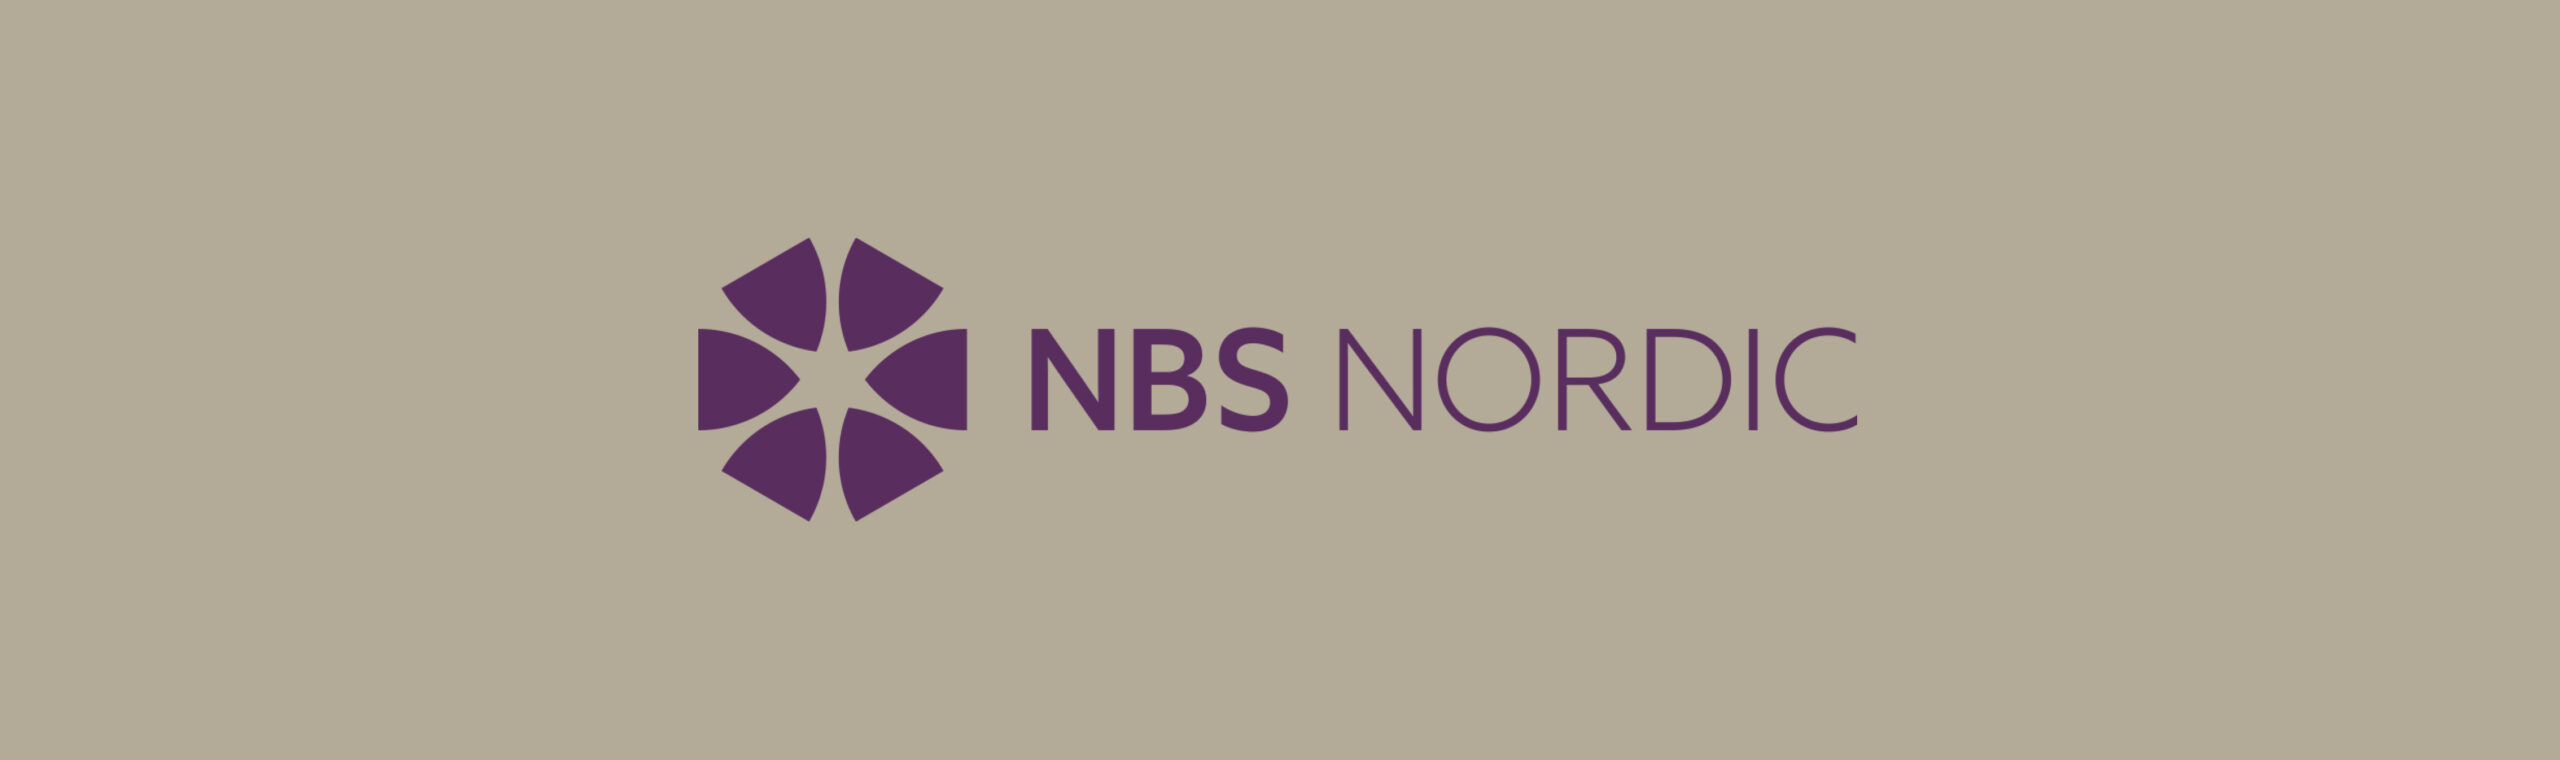 Hørning Parket engages with NBS Nordic